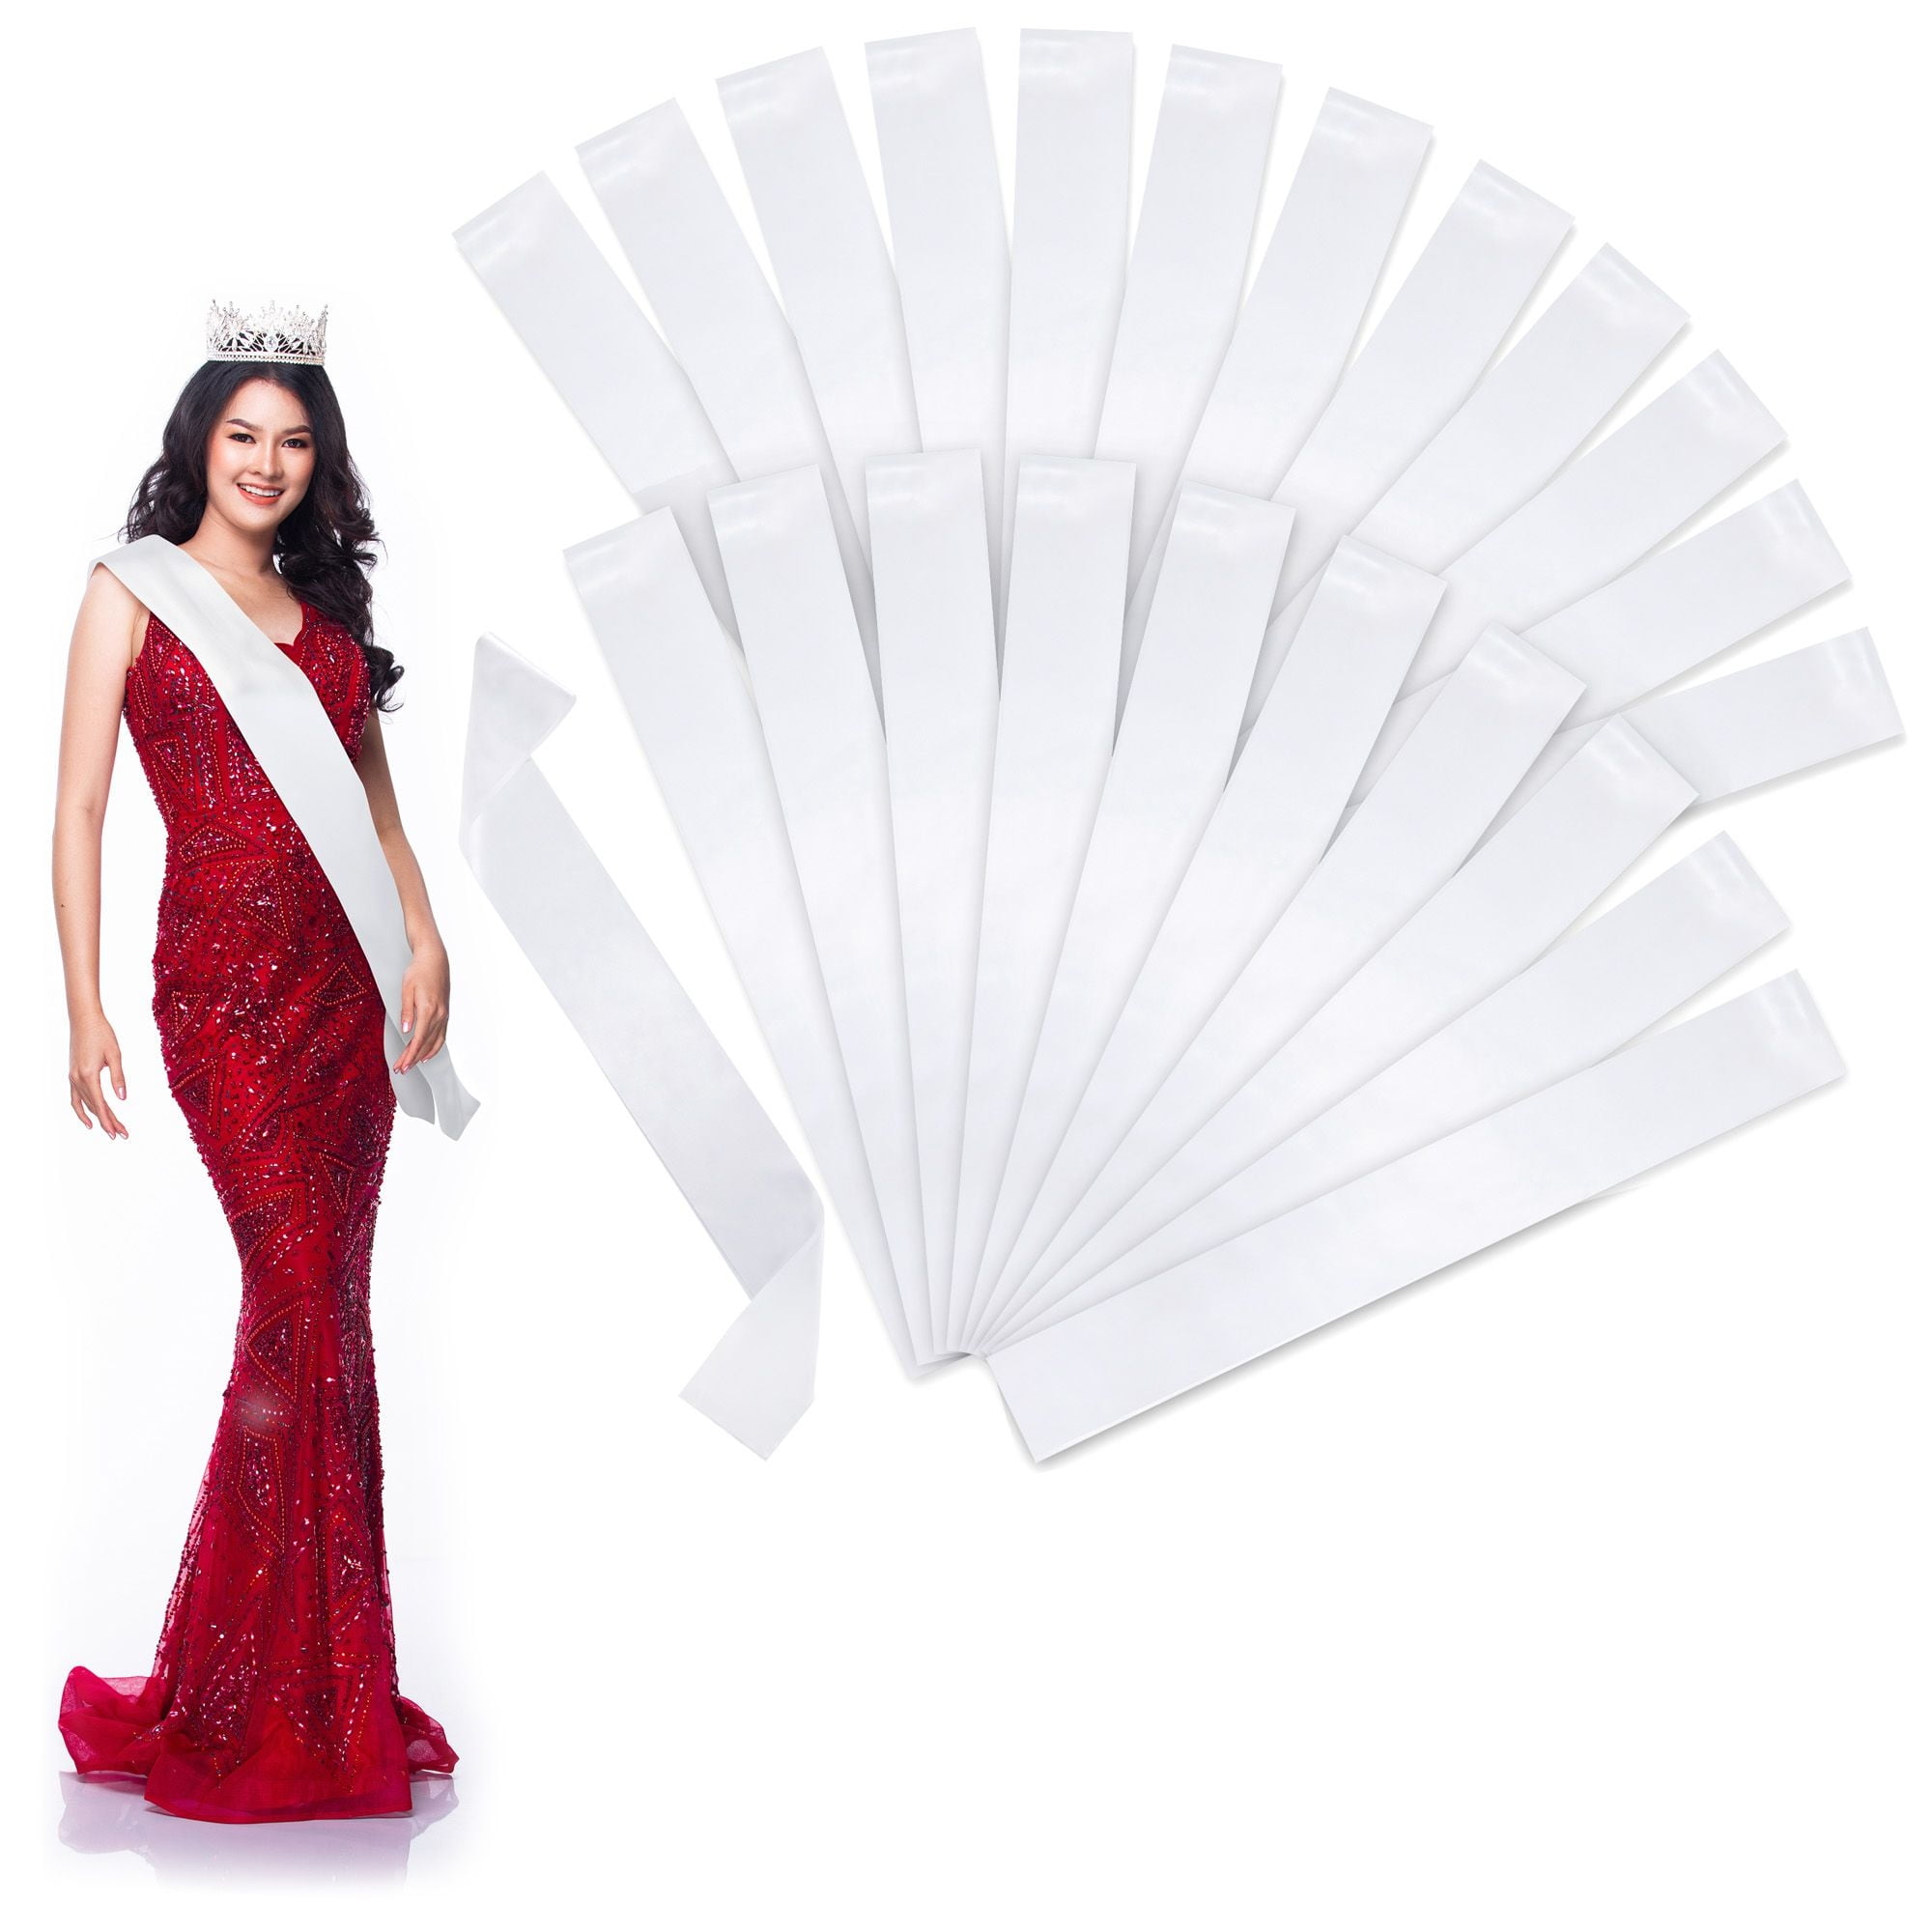 10-piece Prom King, Queen, and Court Sash Set